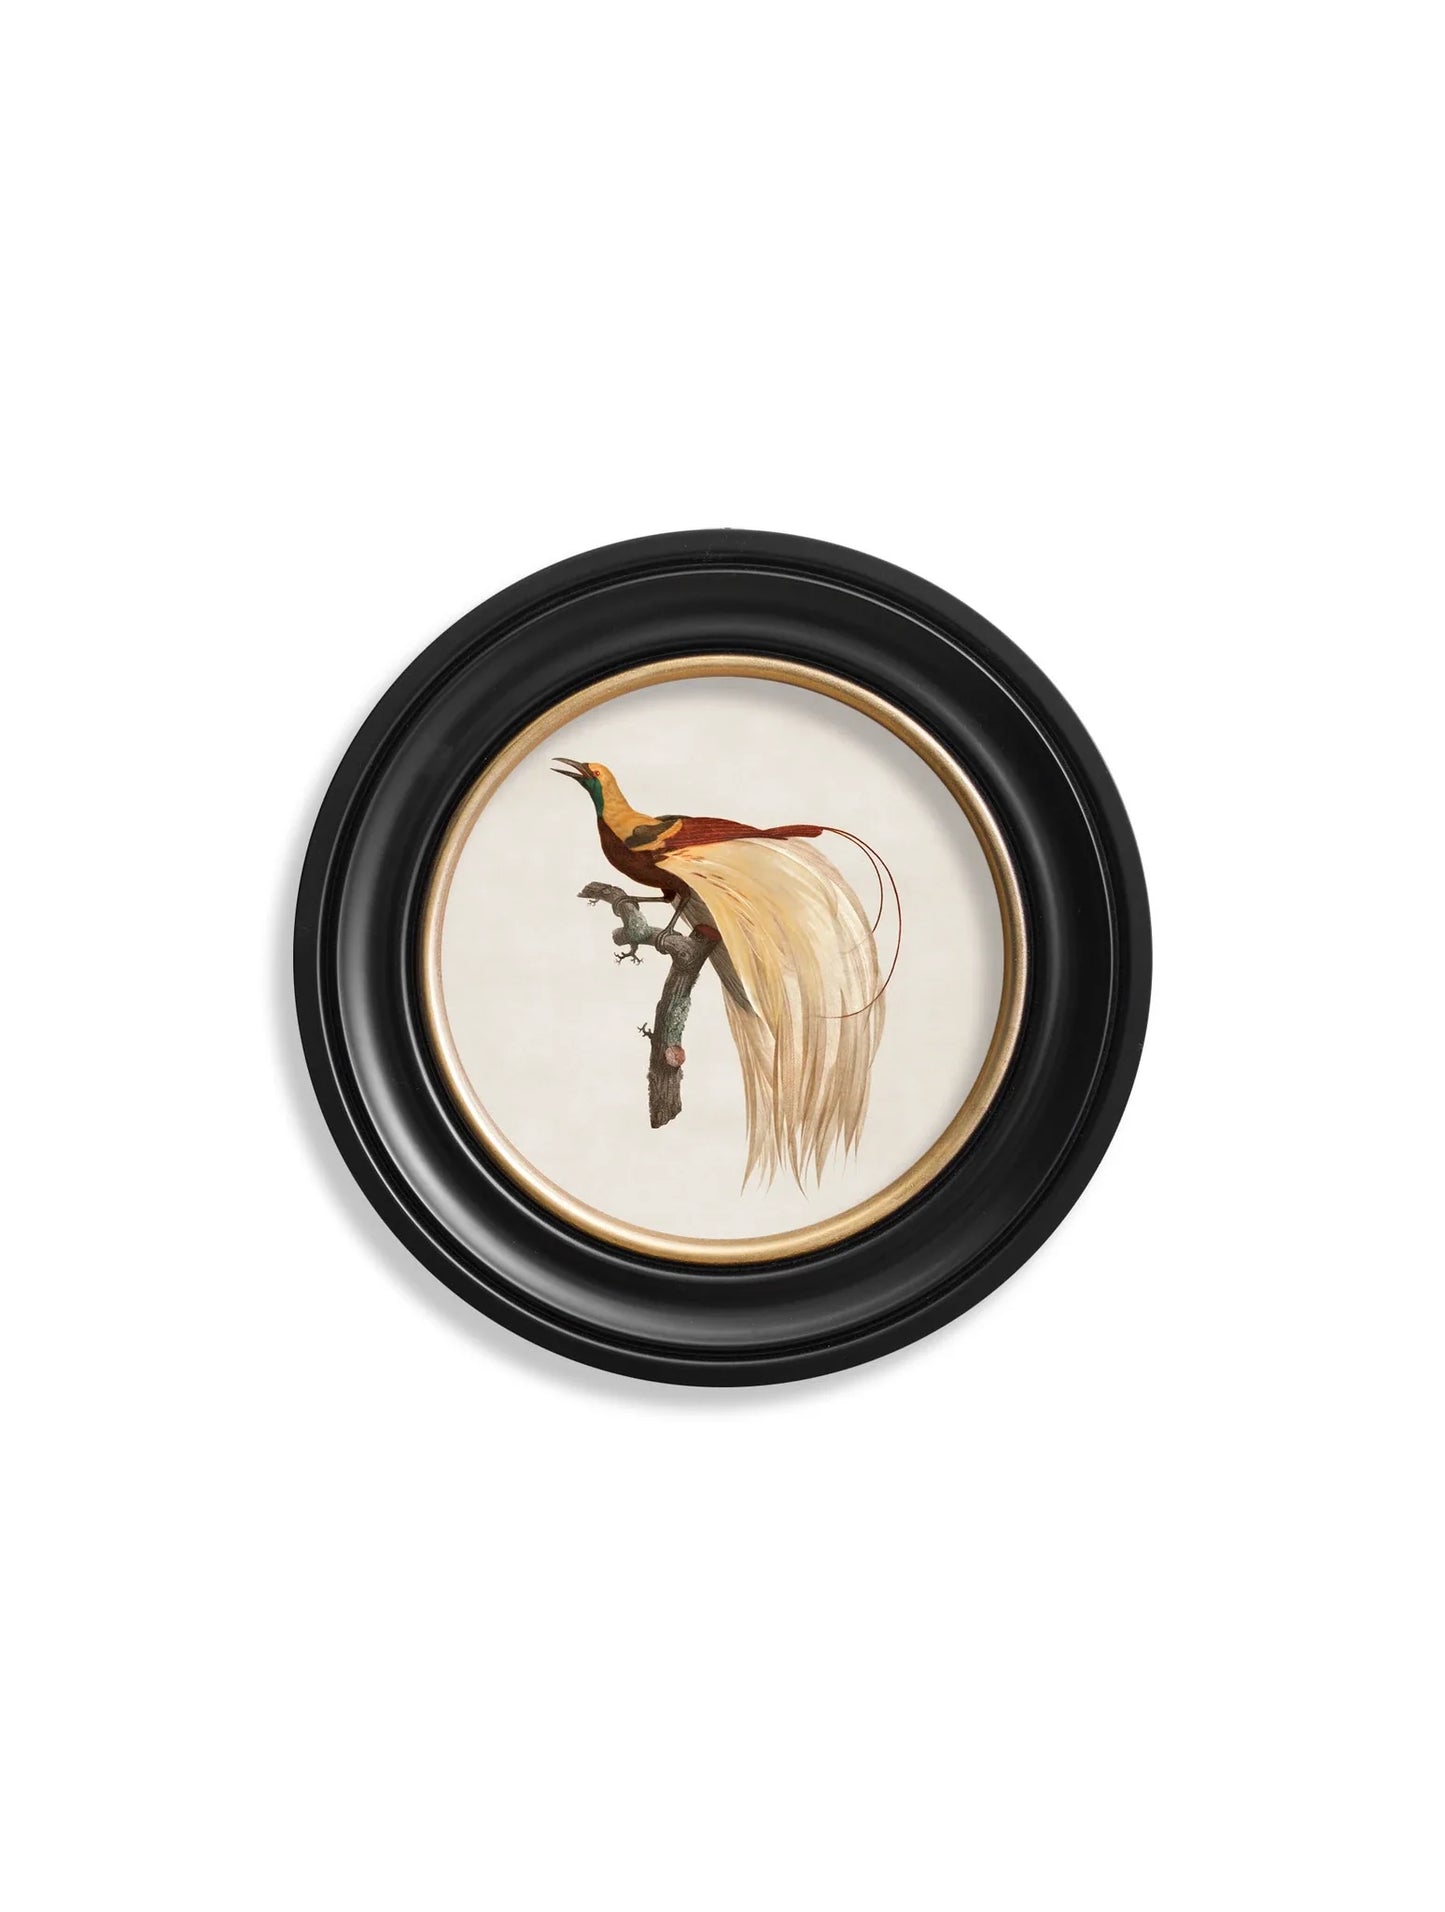 C.1809 Birds of Paradise - Round Frames for sale - Woodcock and Cavendish